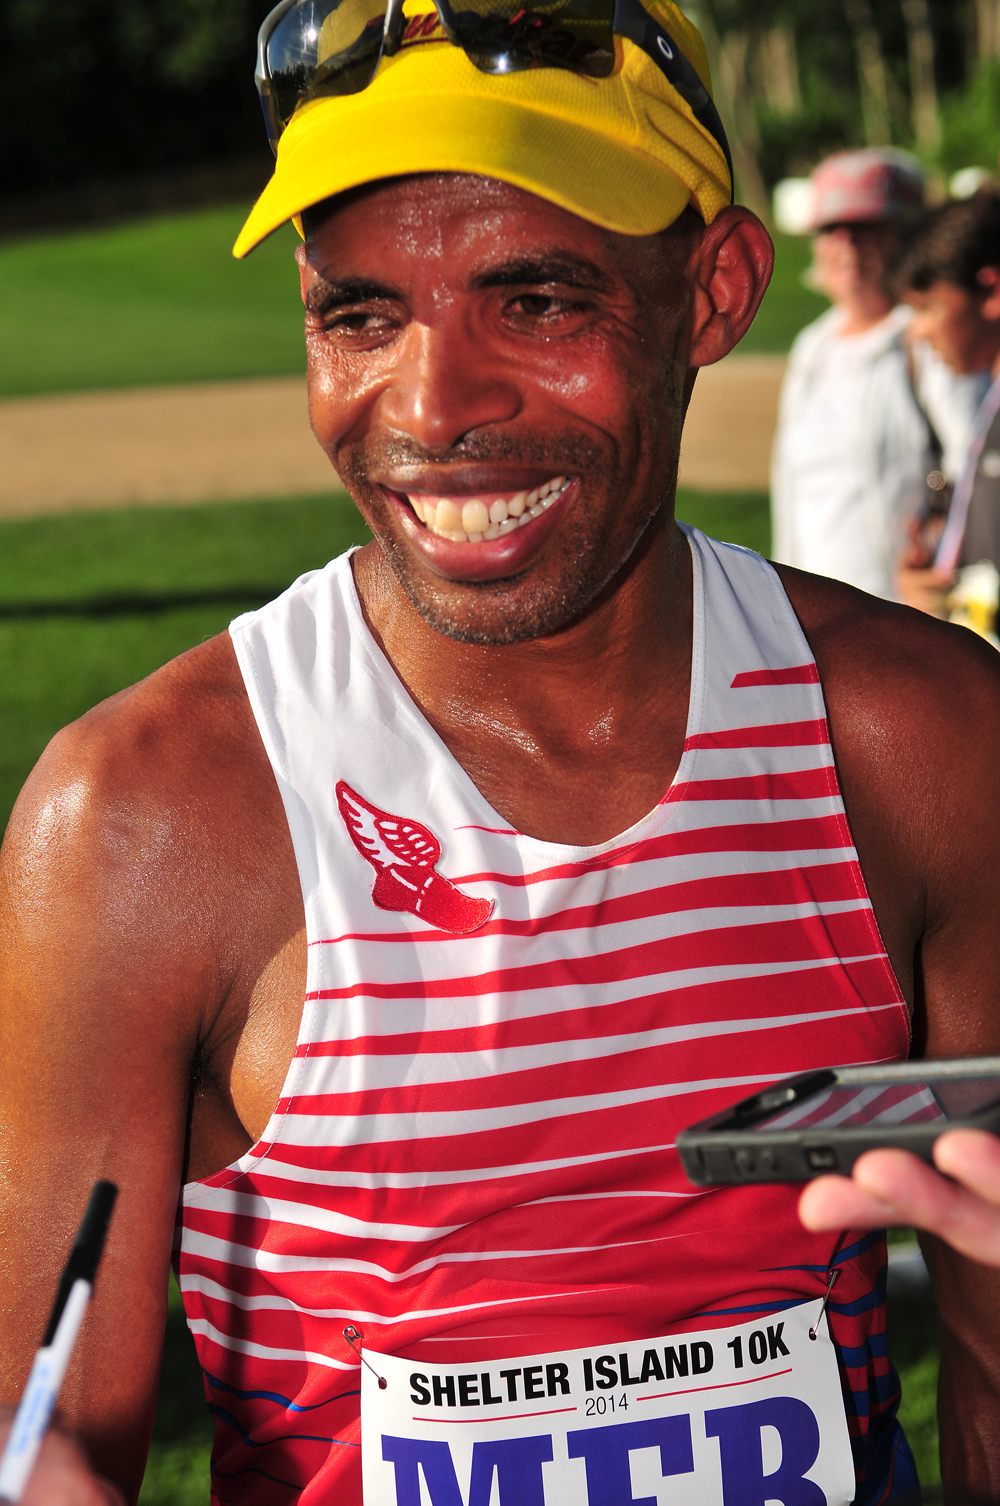 Boston Marathon winner Meb Keflezighi speaks with reporters after crossing the finish line at the Shelter Island 10K Saturday.  (Credit: Bill Landon)